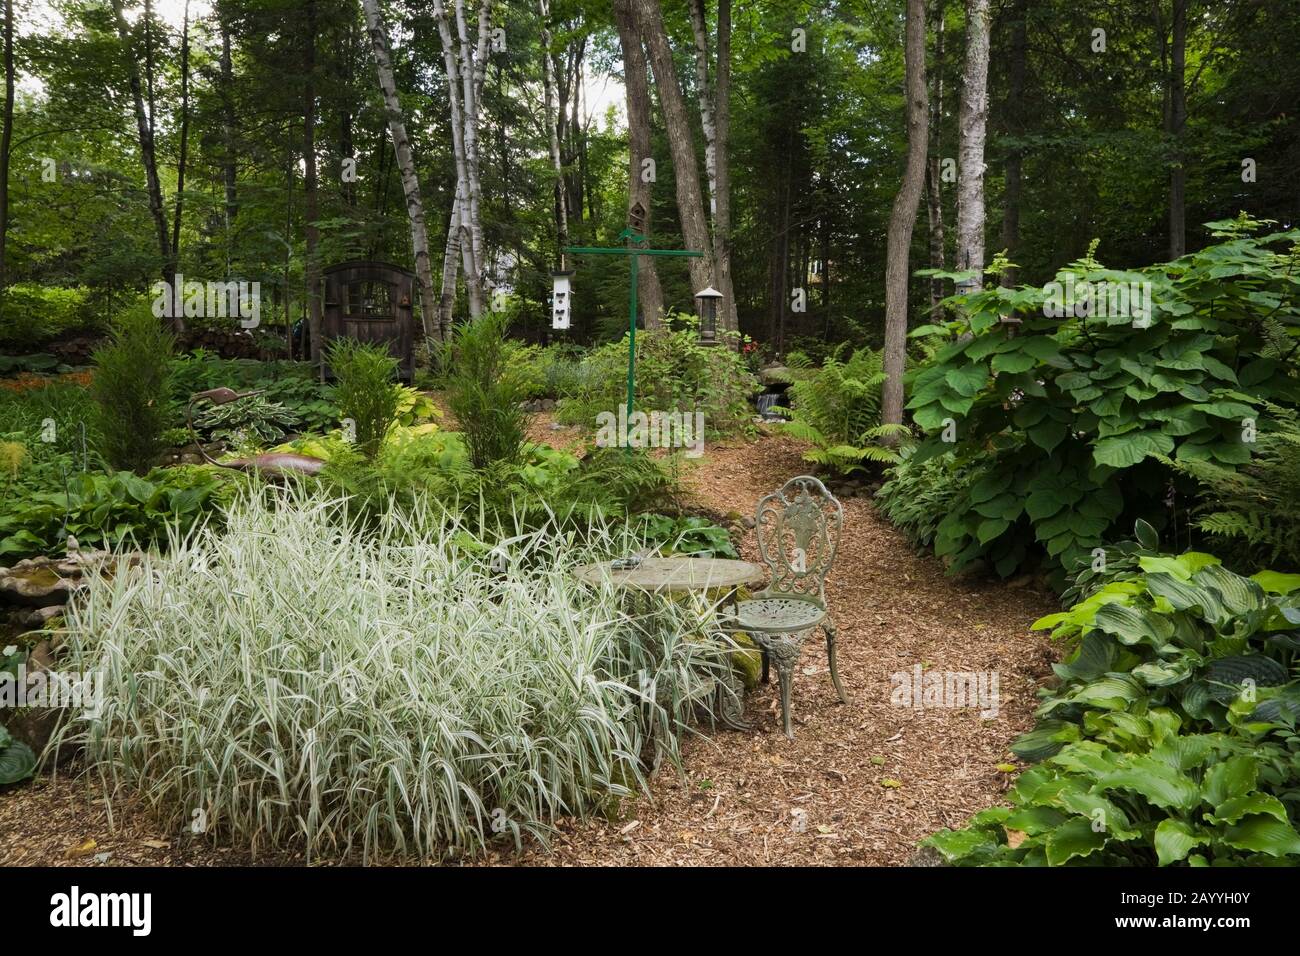 Bistro style cast iron table and chair on cedar mulch path with Phalaris arundinacea 'Picta' - Ornamental Ribbon Grass in backyard garden in summer. Stock Photo